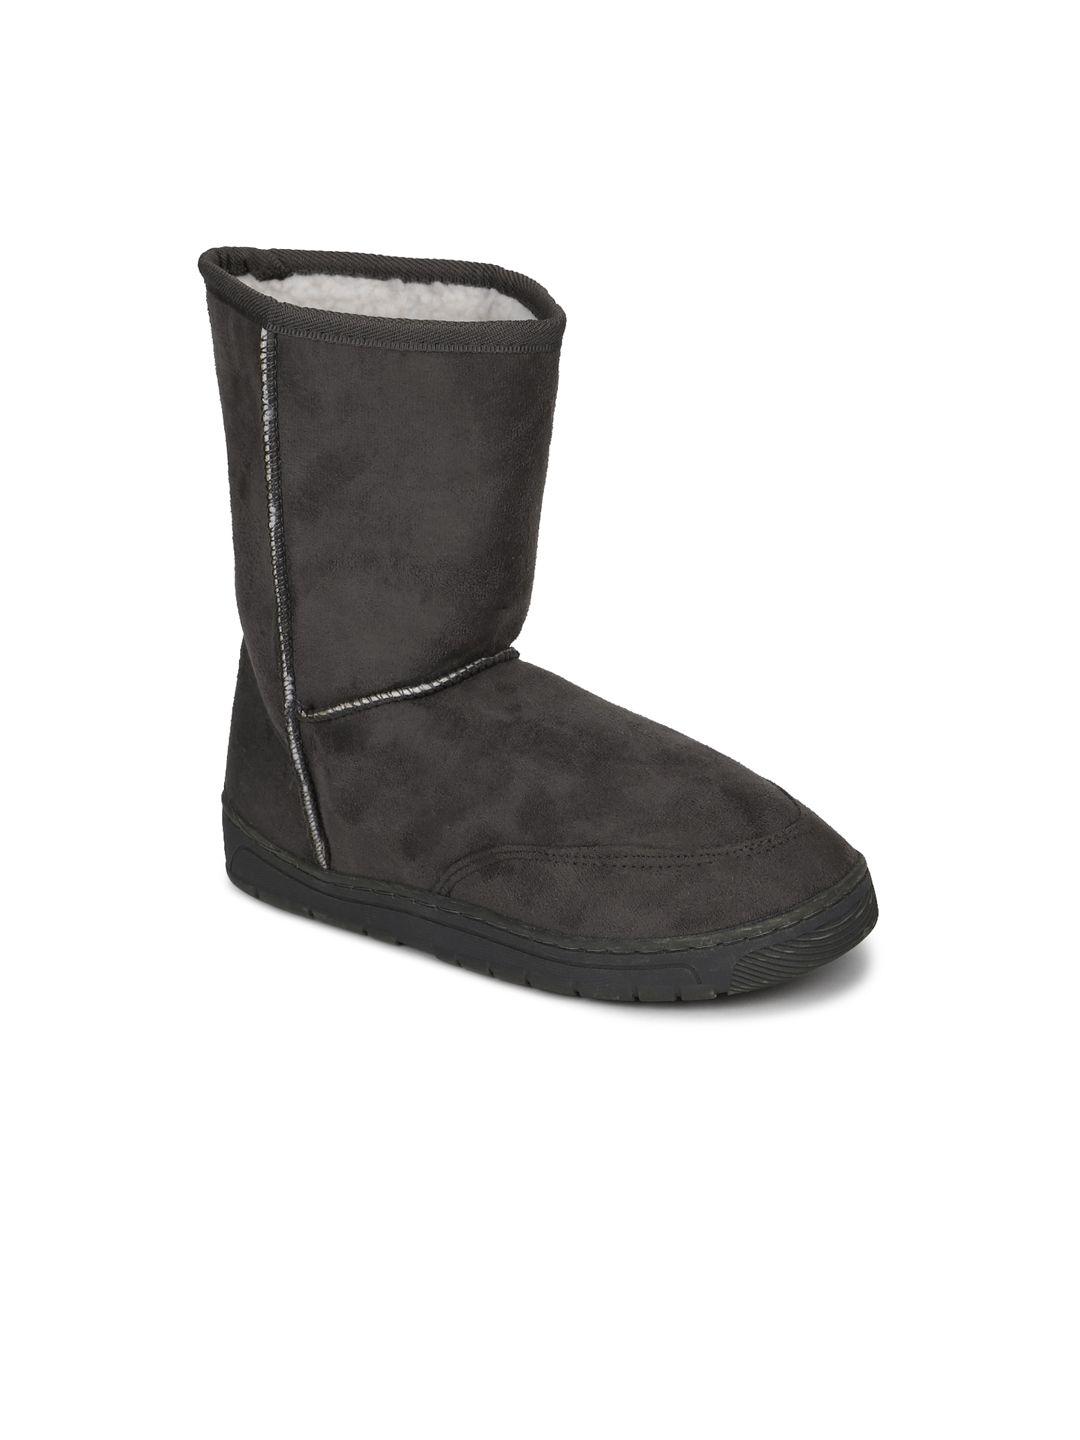 truffle collection charcoal suede flatform heeled boots